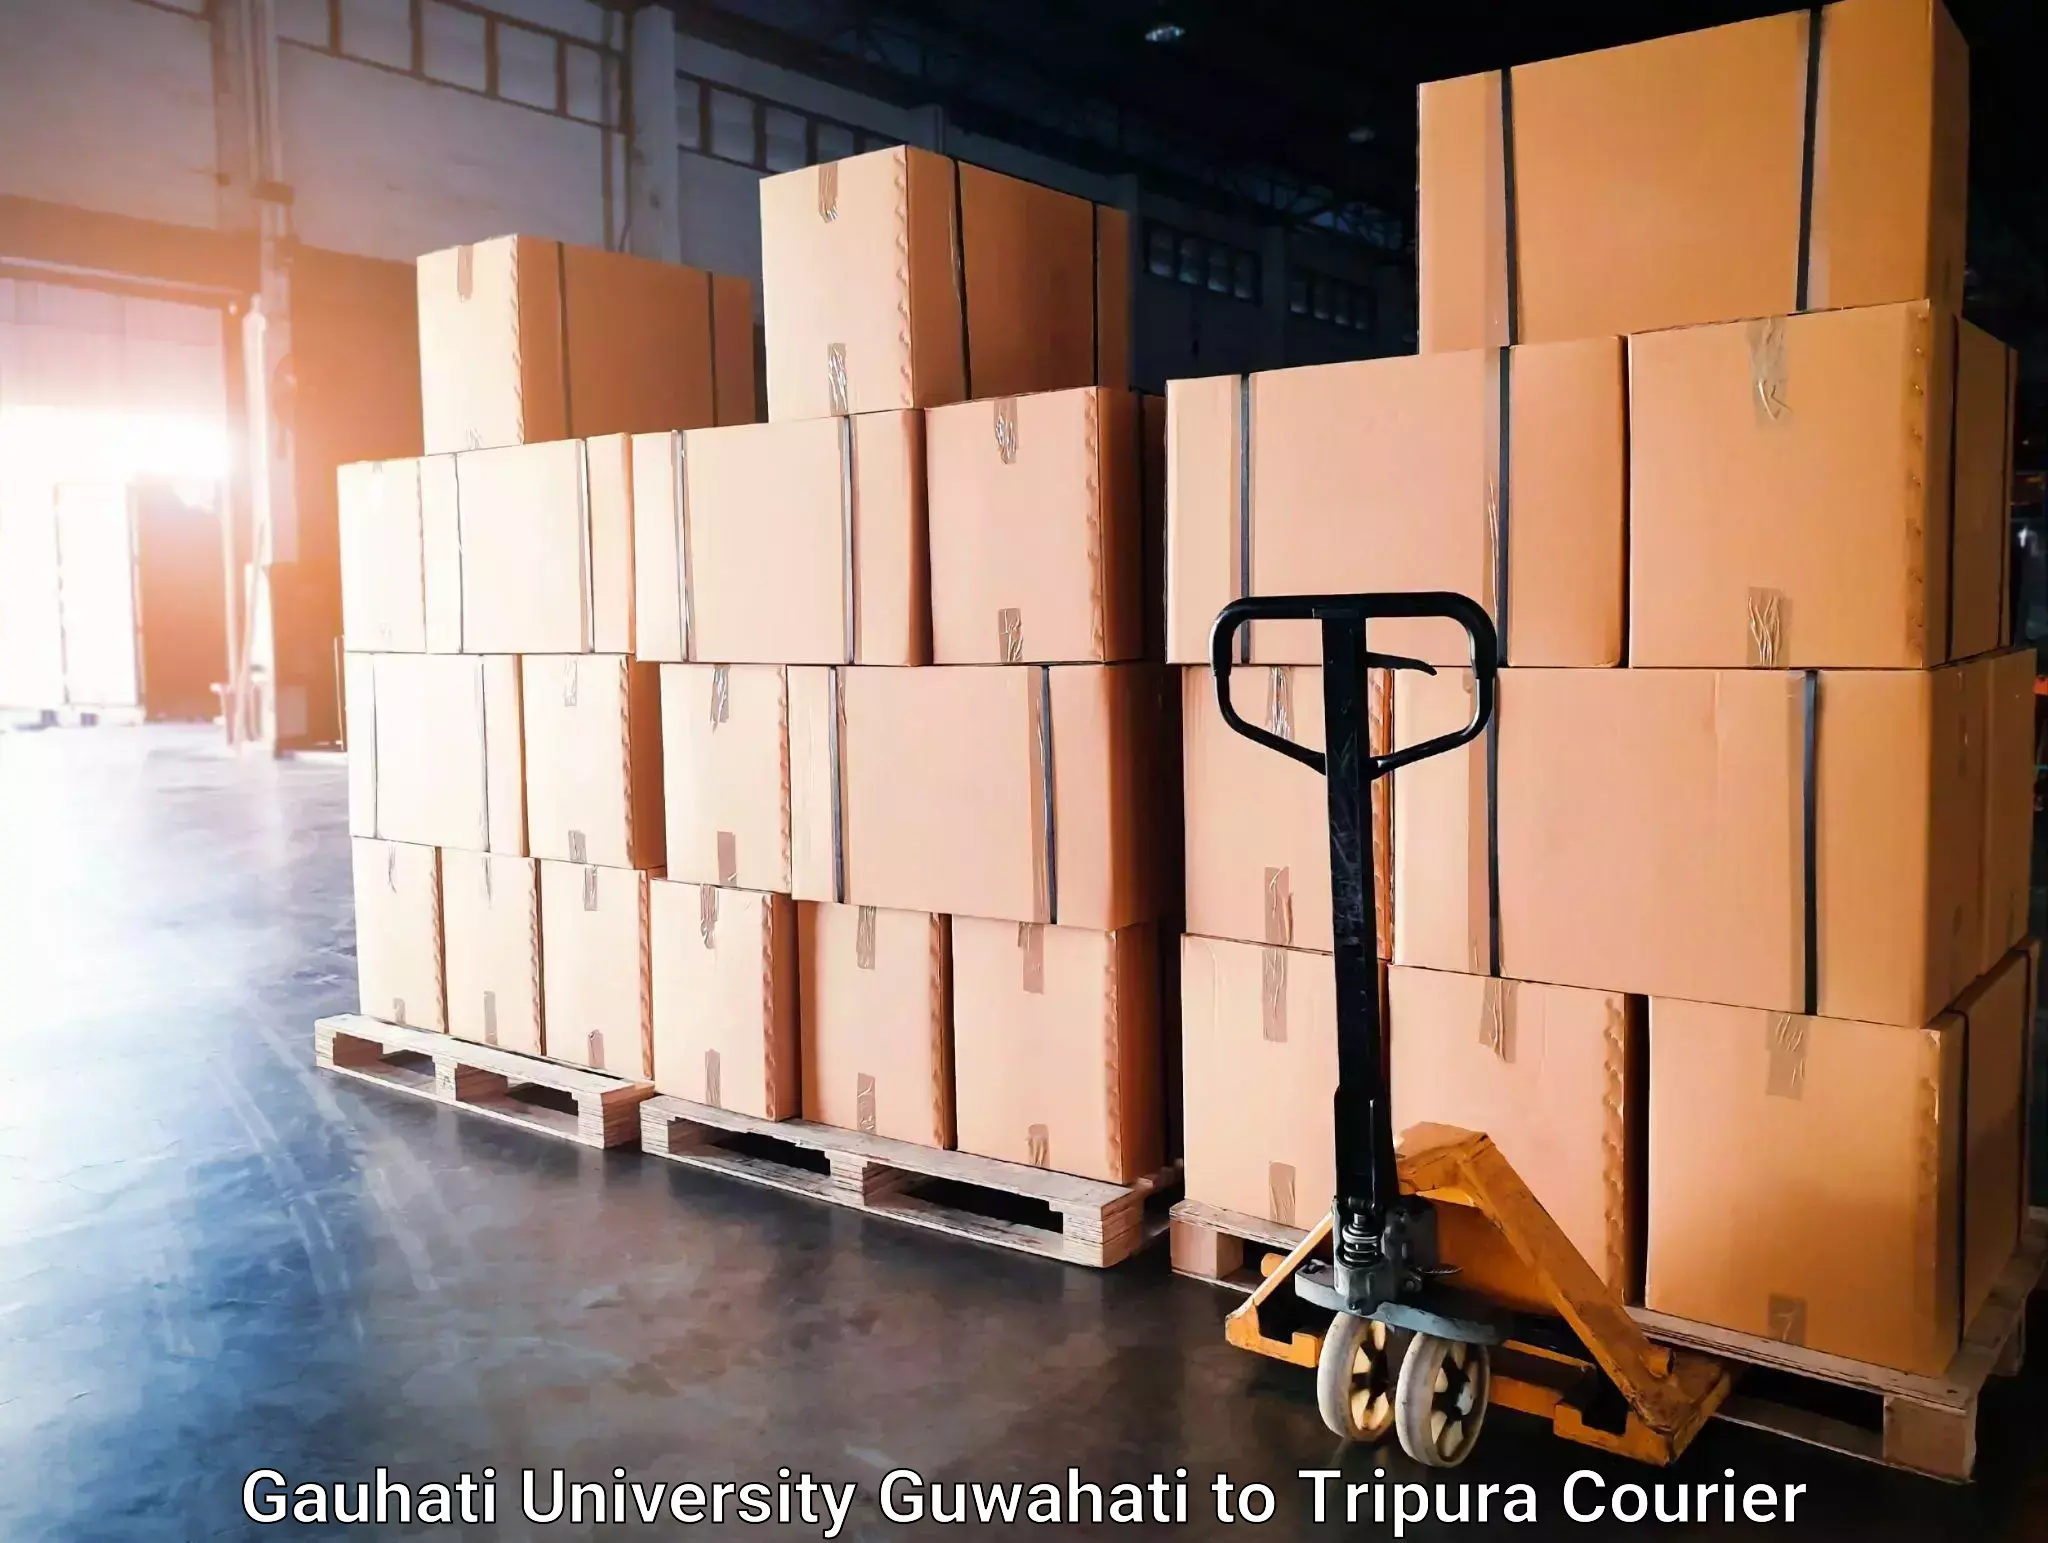 Fast delivery service in Gauhati University Guwahati to Udaipur Tripura